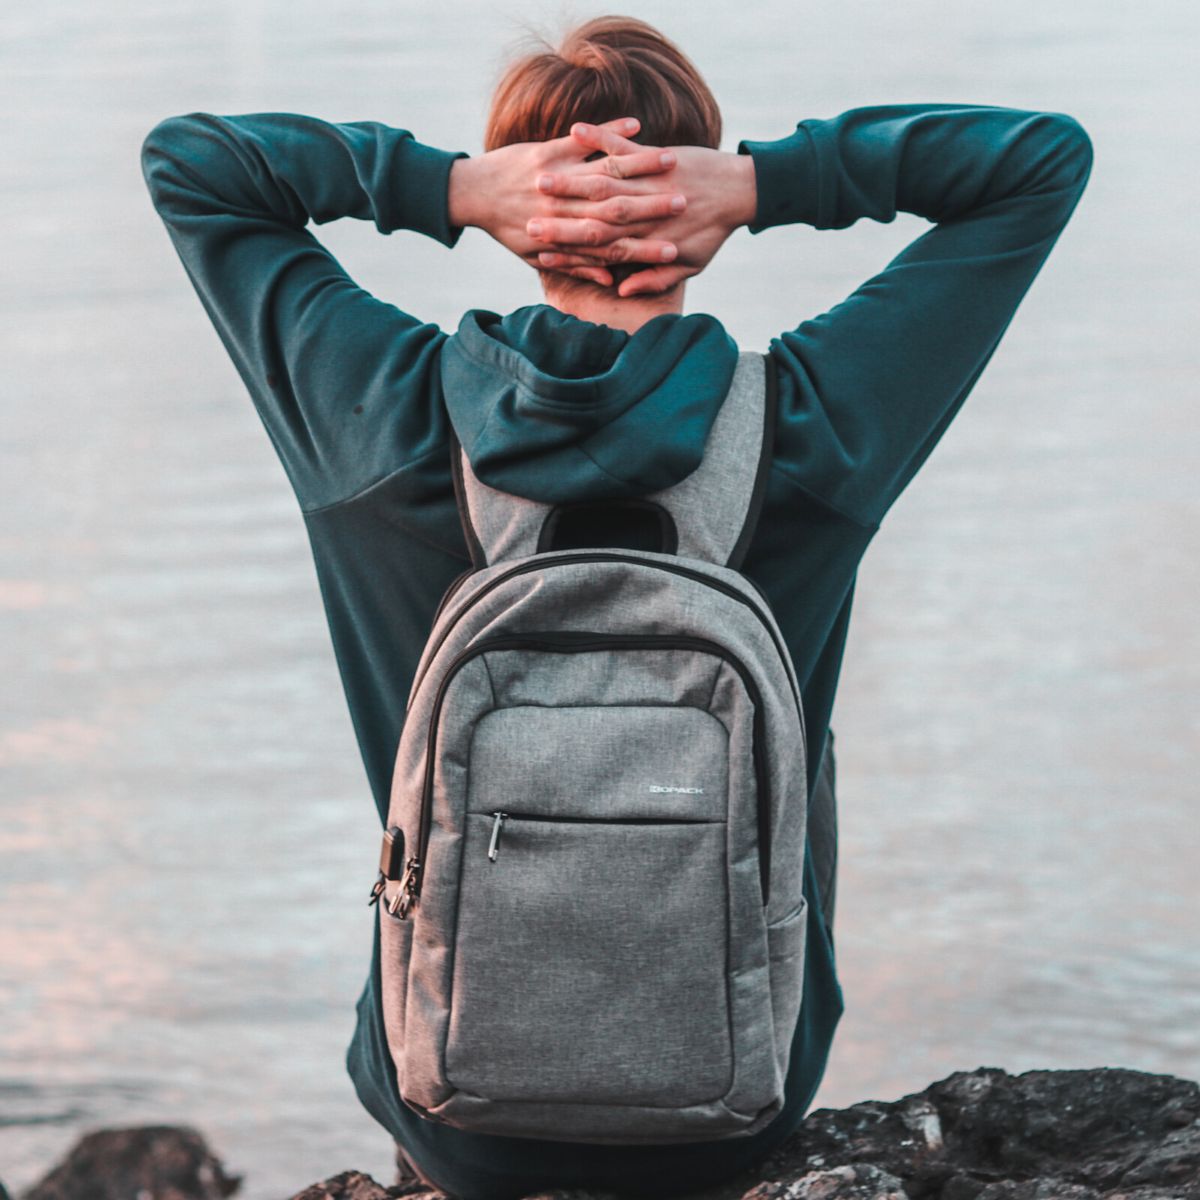 A boy with his hands folded behind his head wears a backpack.